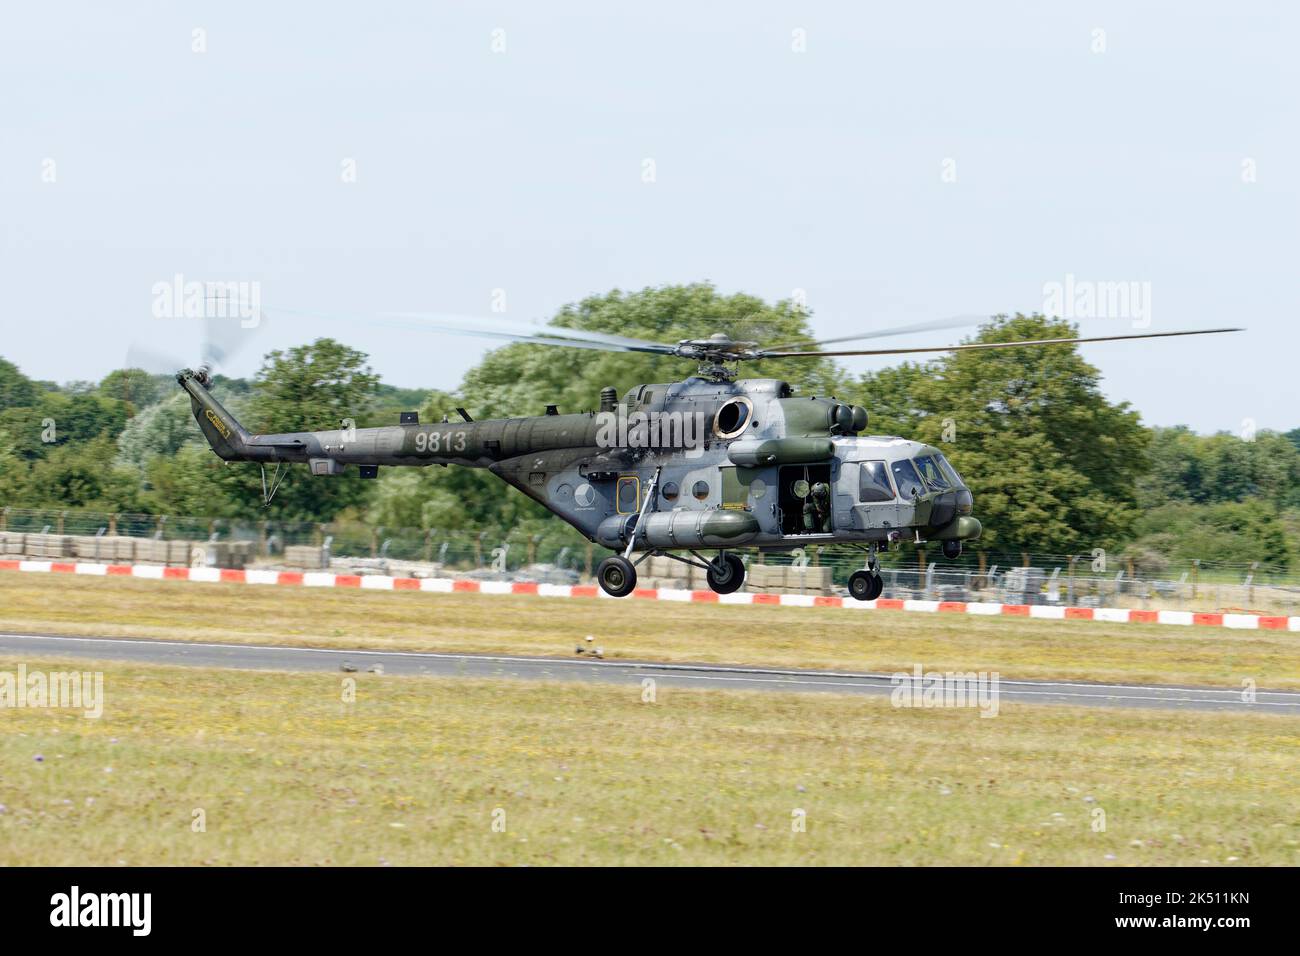 Mil MI-171s Military Transport Helicopter from the Czech Air Force demonstrates at RAF Fairford as part of the Royal International Air Tattoo Stock Photo